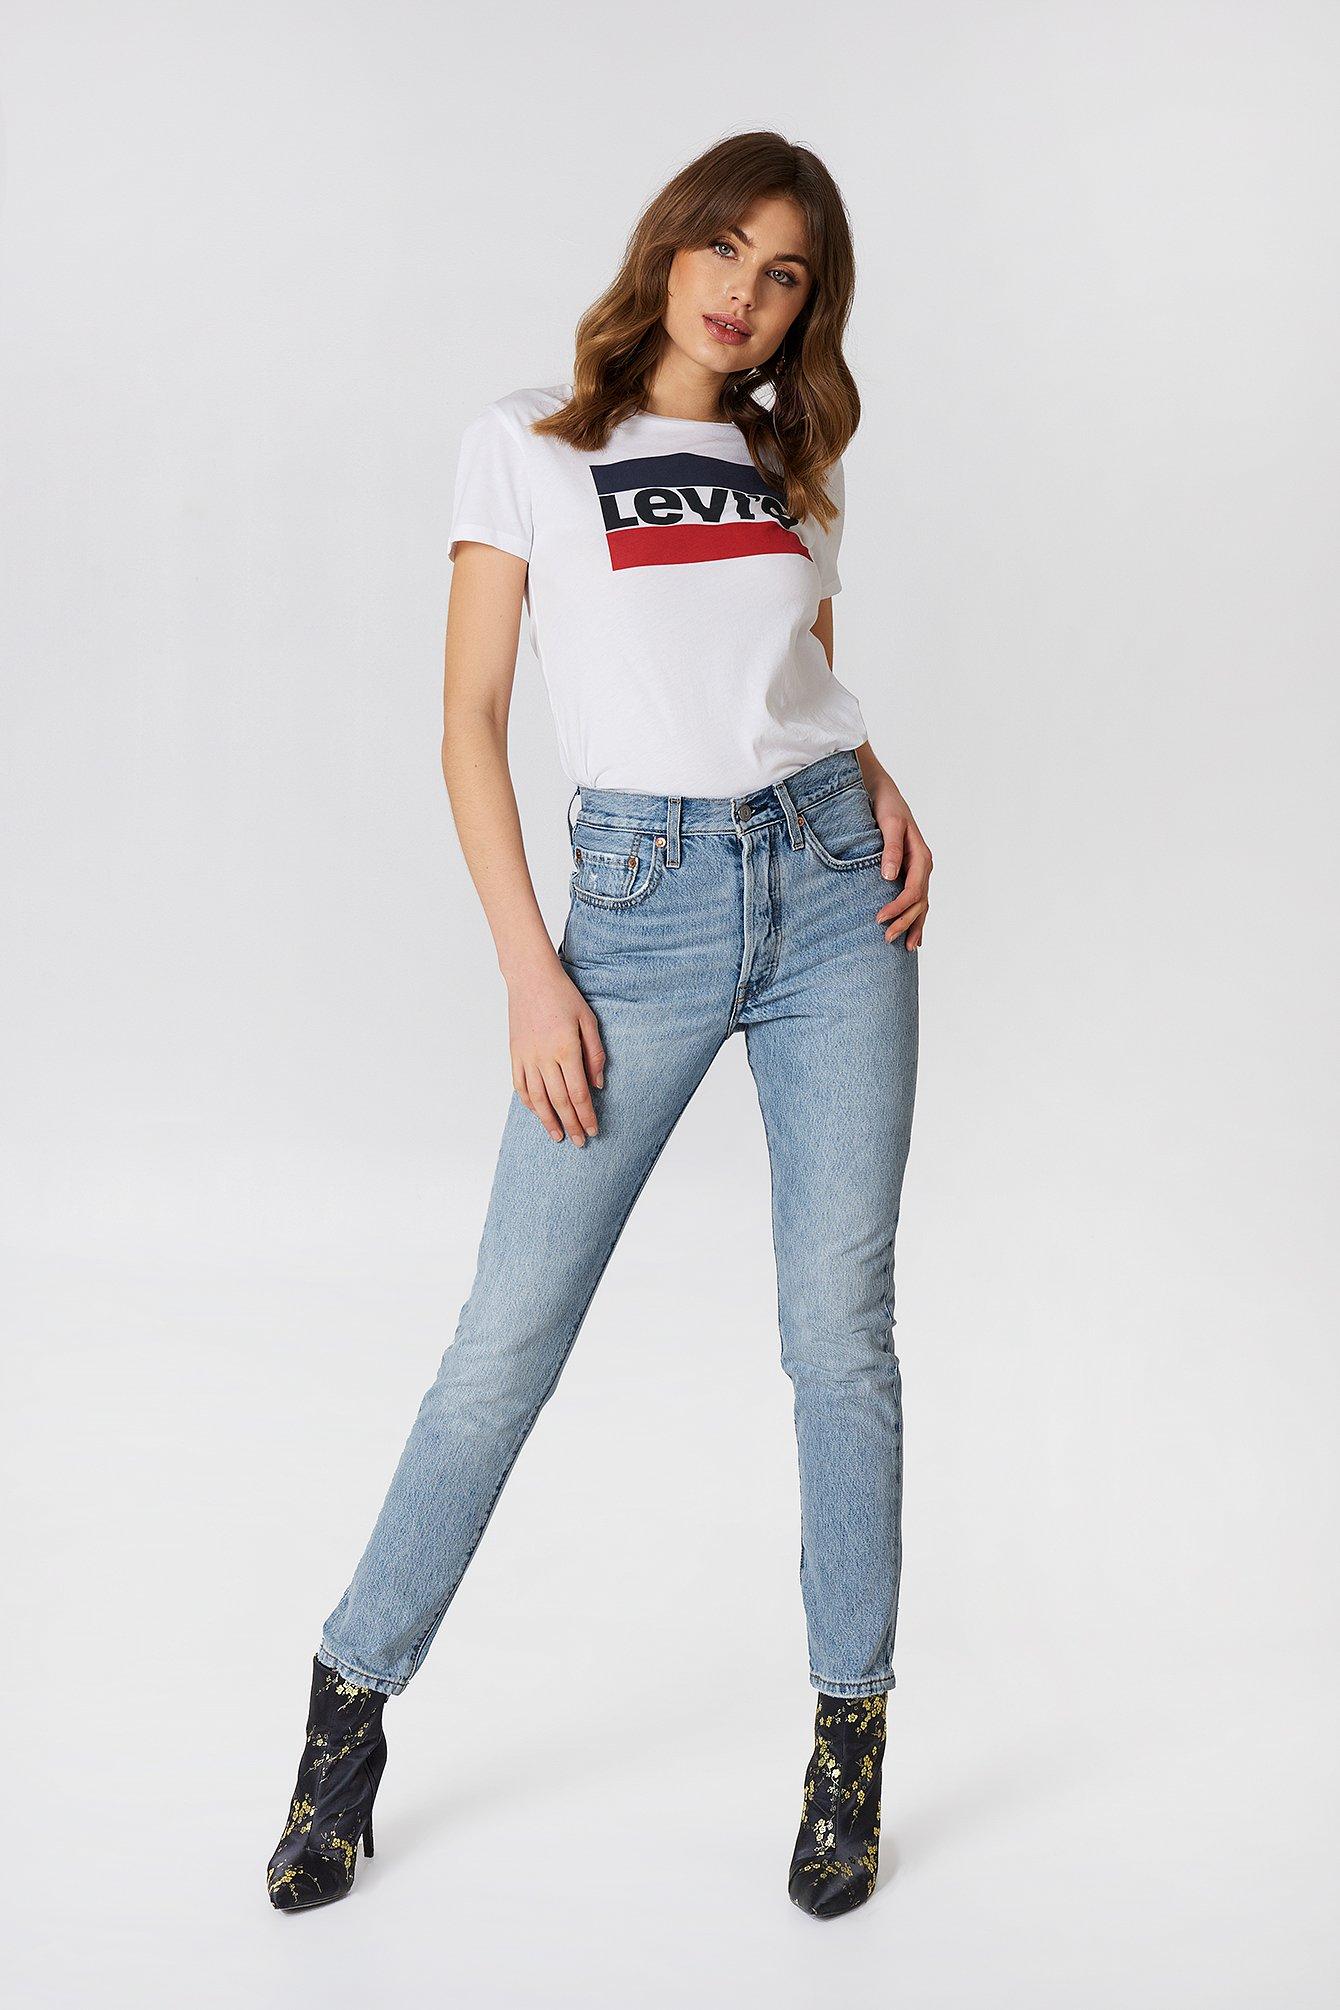 levis lovefool jeans